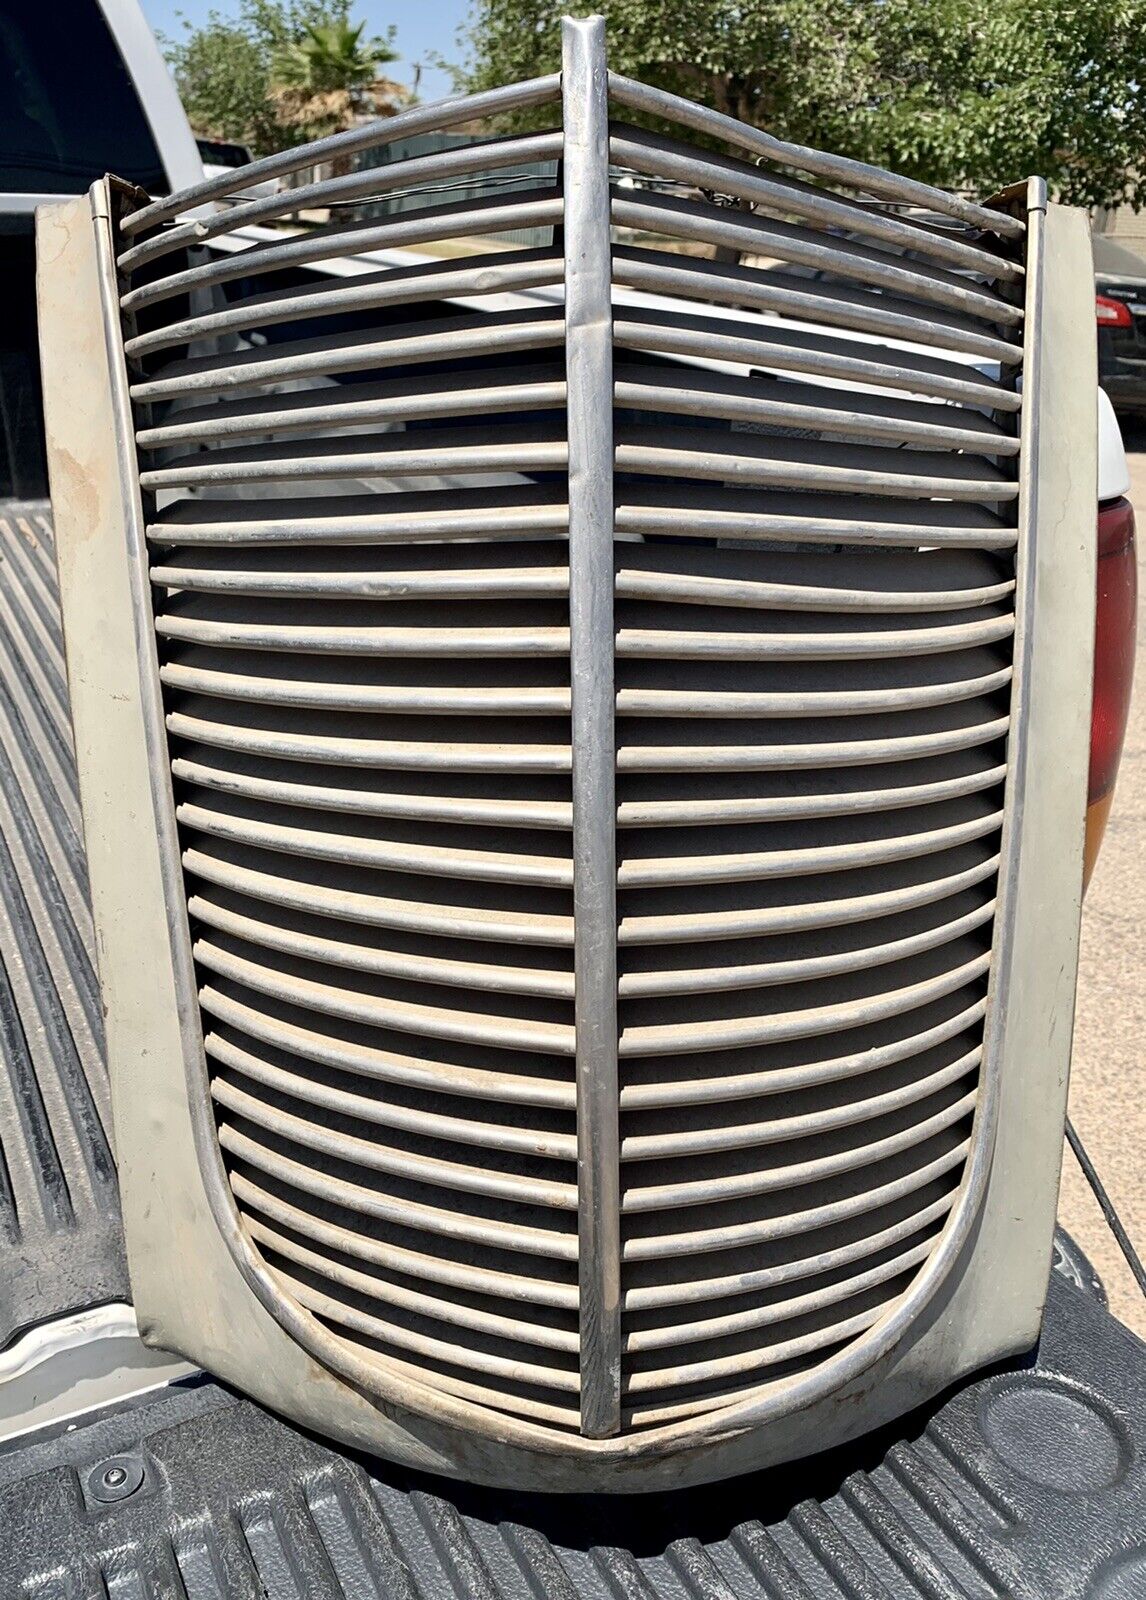 Rare Vintage 1937 Chrysler Imperial Airflow Eight C-17 Grill Grille Front Panel